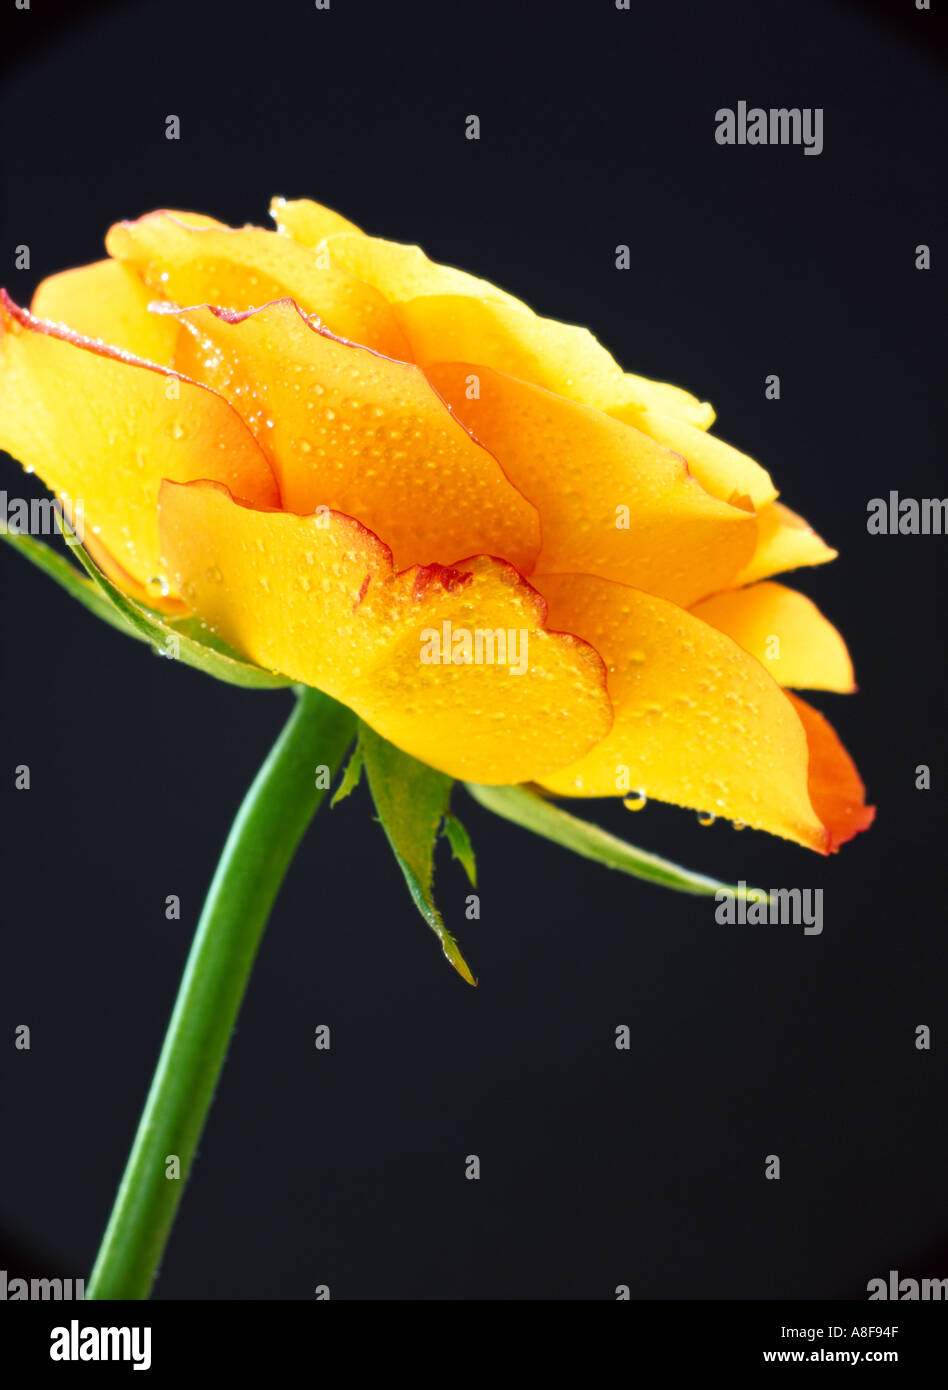 Rosa Rumba flower with water droplets Side view of a yellow rose backlit against dark background Stock Photo